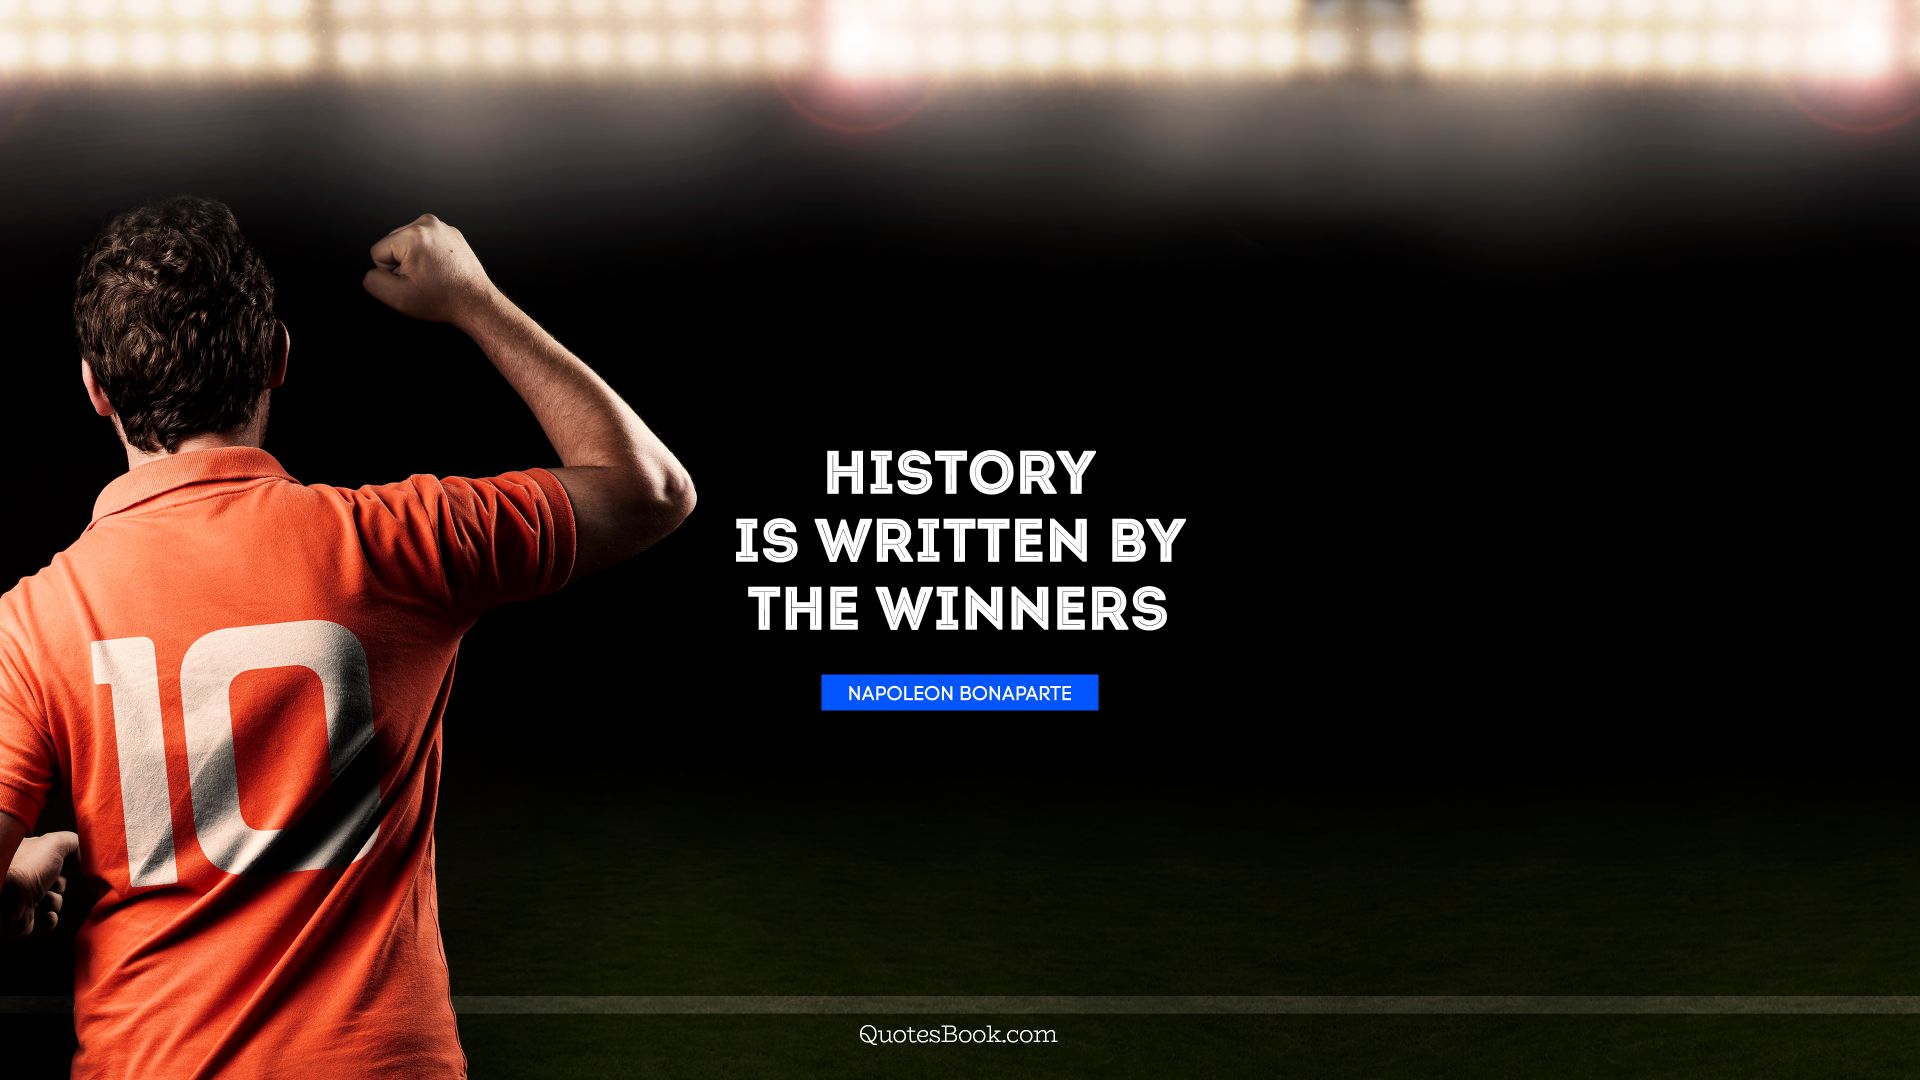 History is written by the winners. - Quote by Napoleon Bonaparte